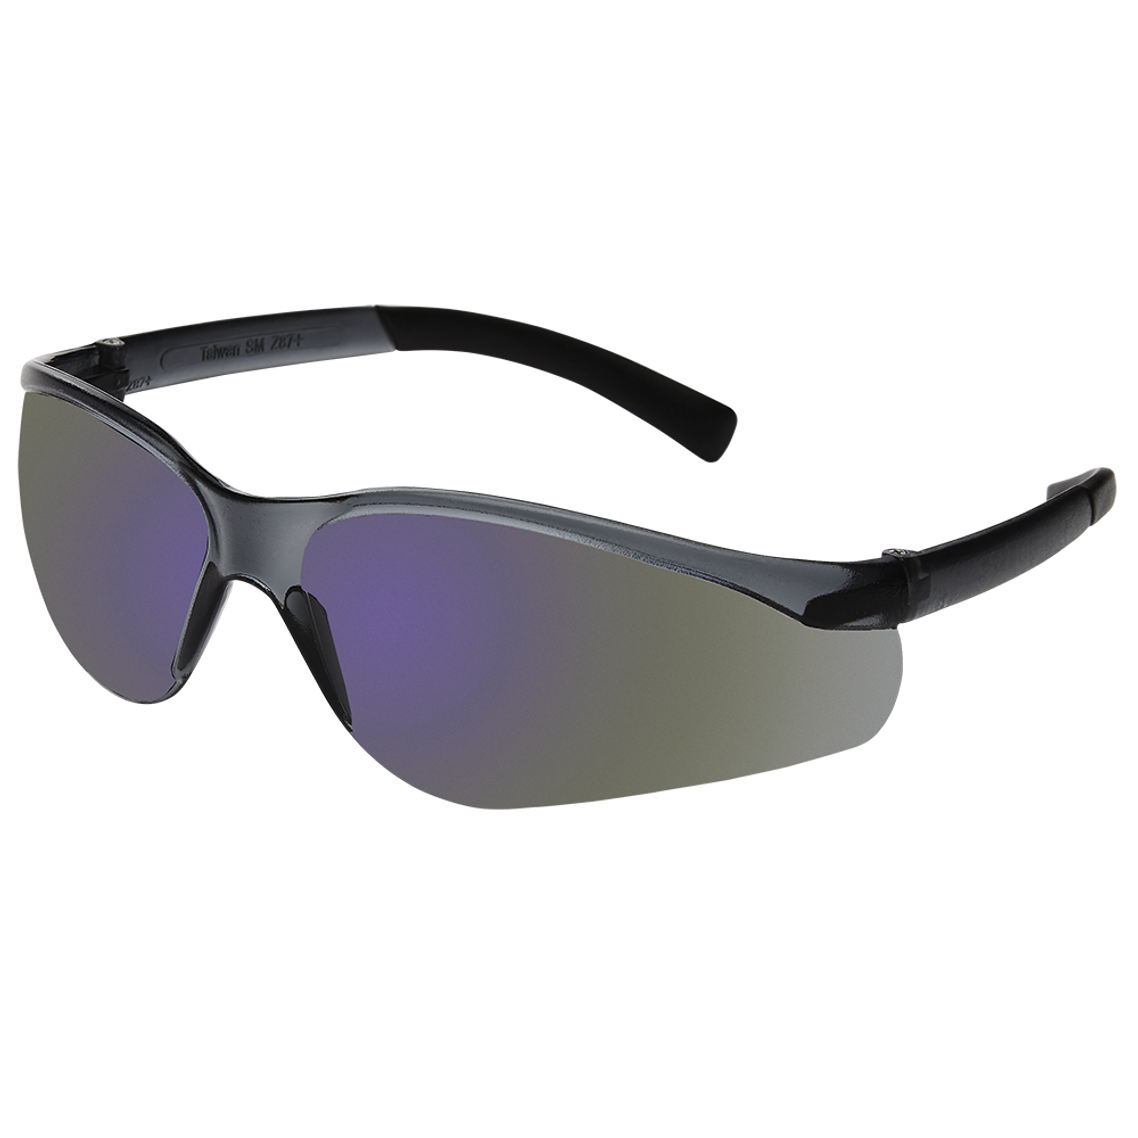 Sellstorm Safety Glasses - SmokeTint - Hard Coated (12 Pack) | Safetywear.ca